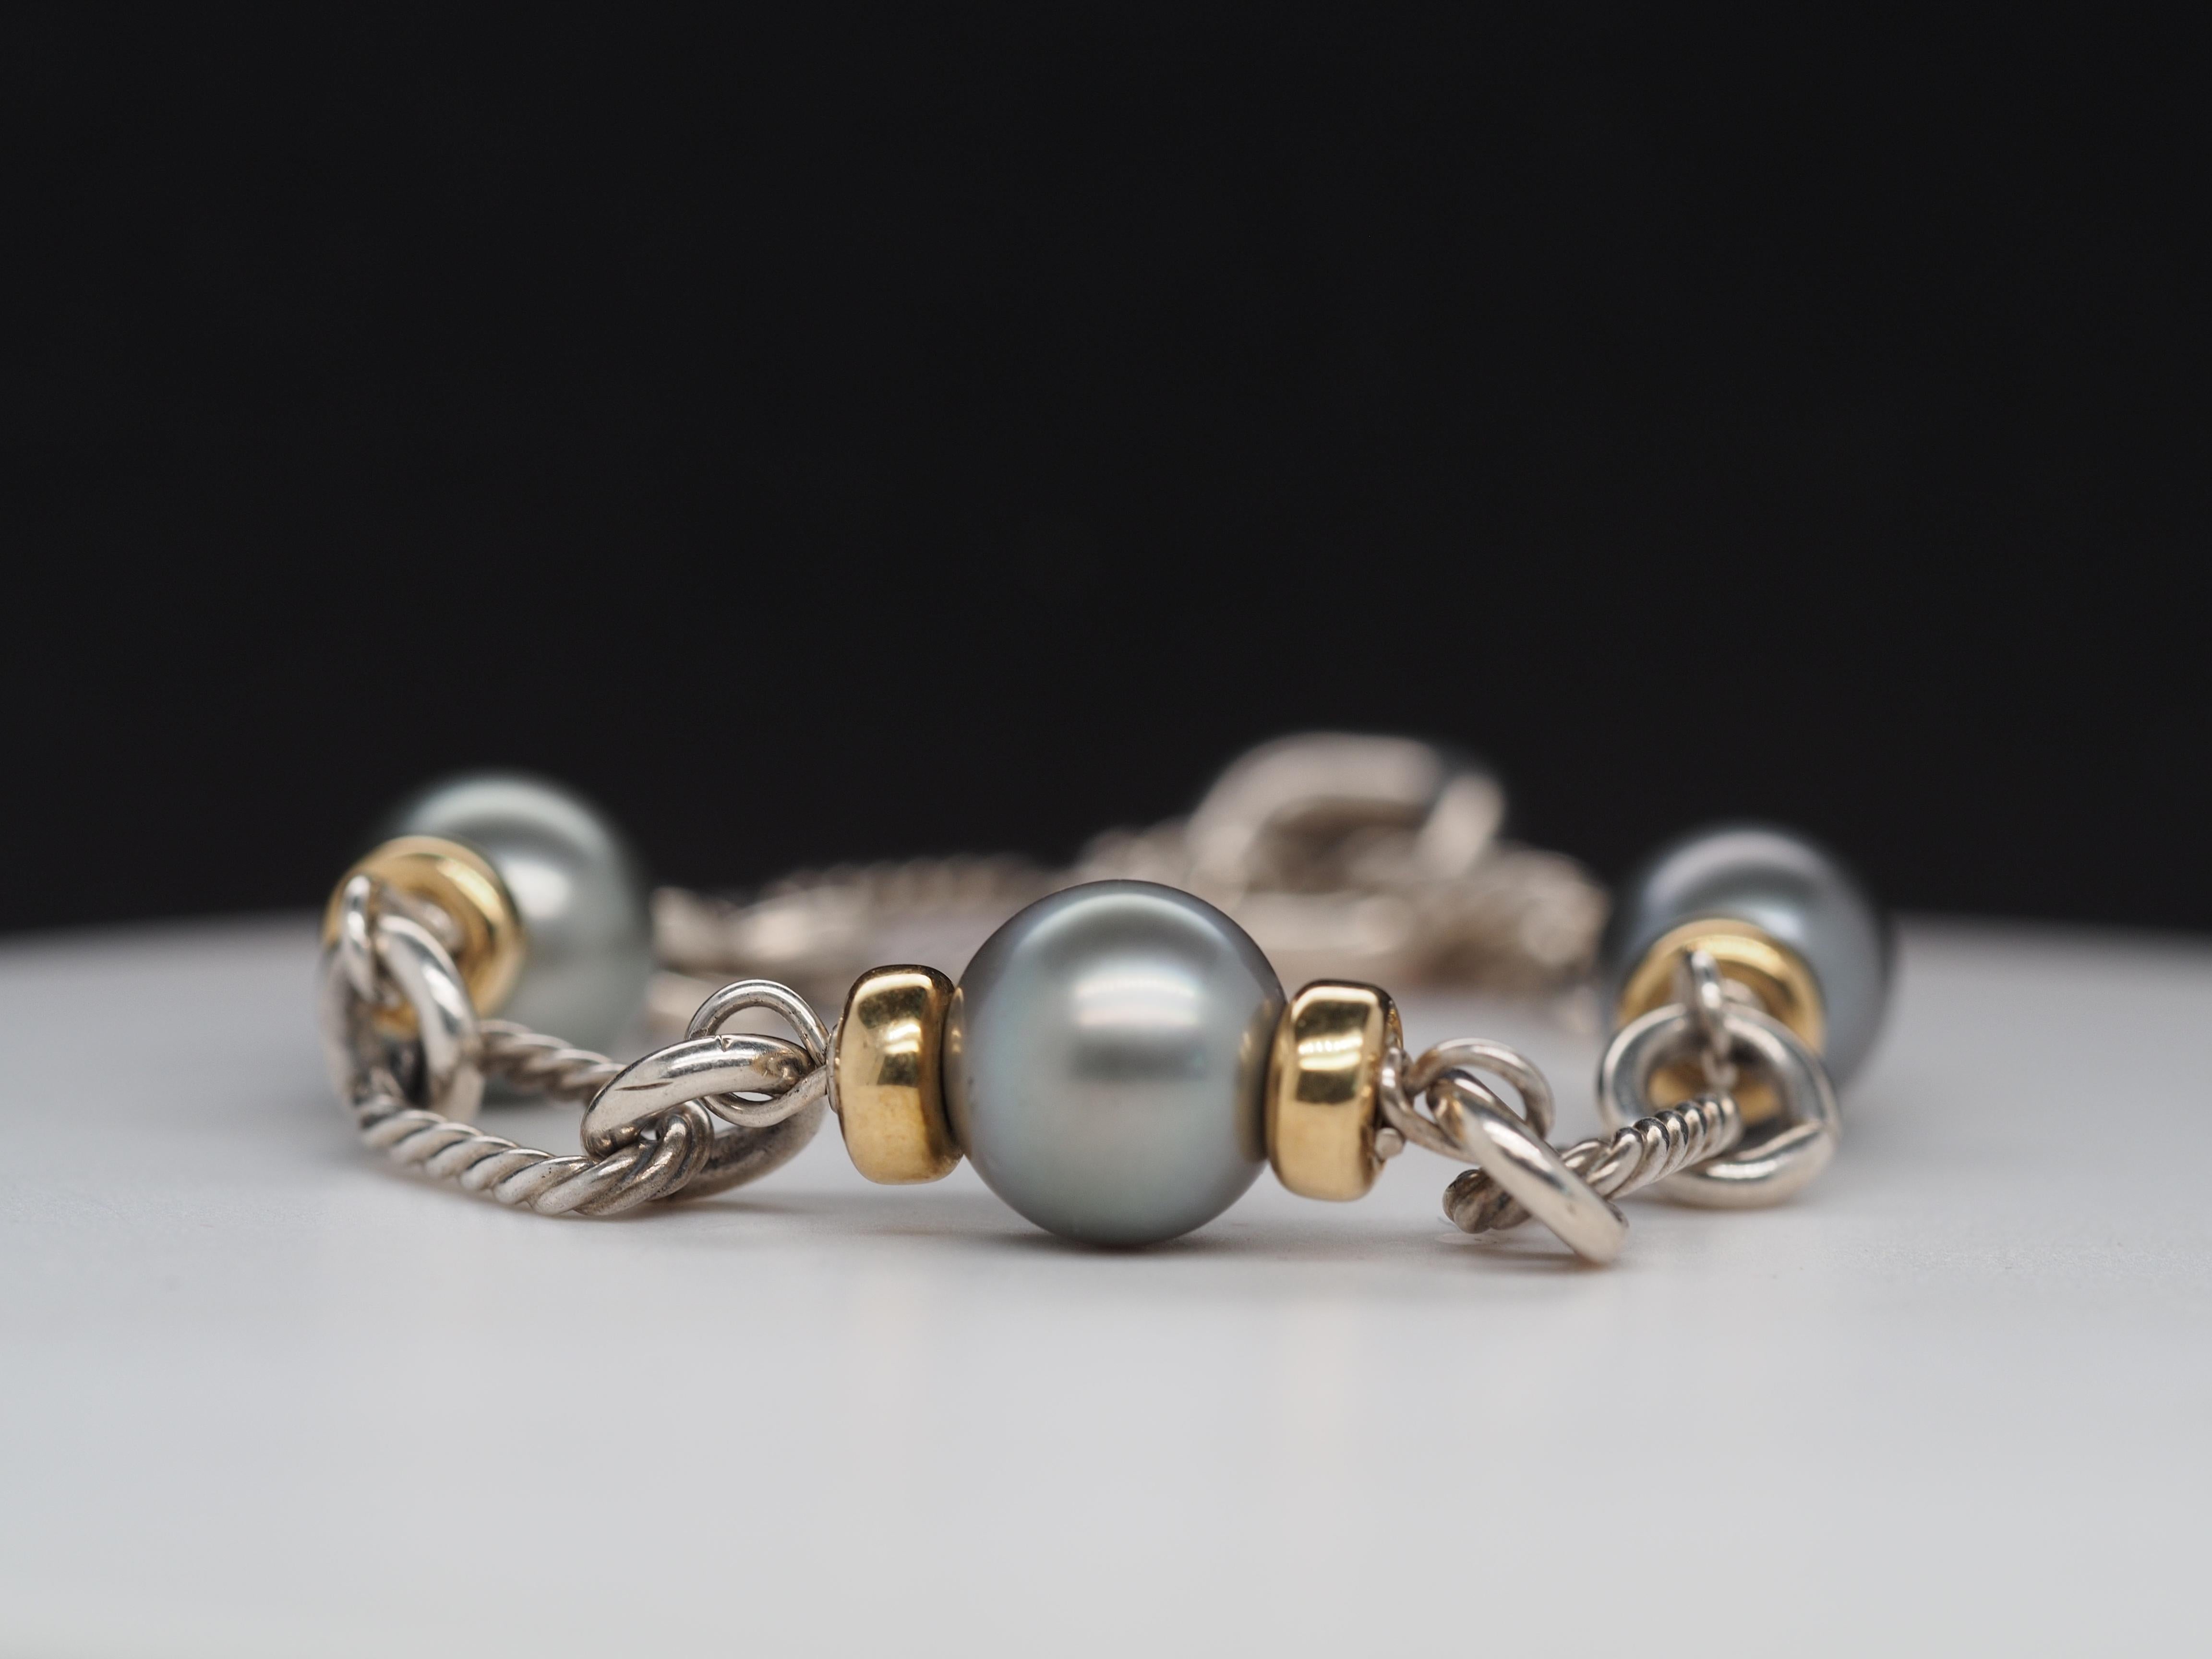 Item Details:
Metal Type:  18K Yellow Gold & Sterling Silver [Hallmarked, and Tested]
Weight:  18.3 grams (All Items Total)

Stone Details:
Type: Pearl
Size: 11mm each

Bracelet Length Measurement:   7.25 Inches

Condition:  Excellent